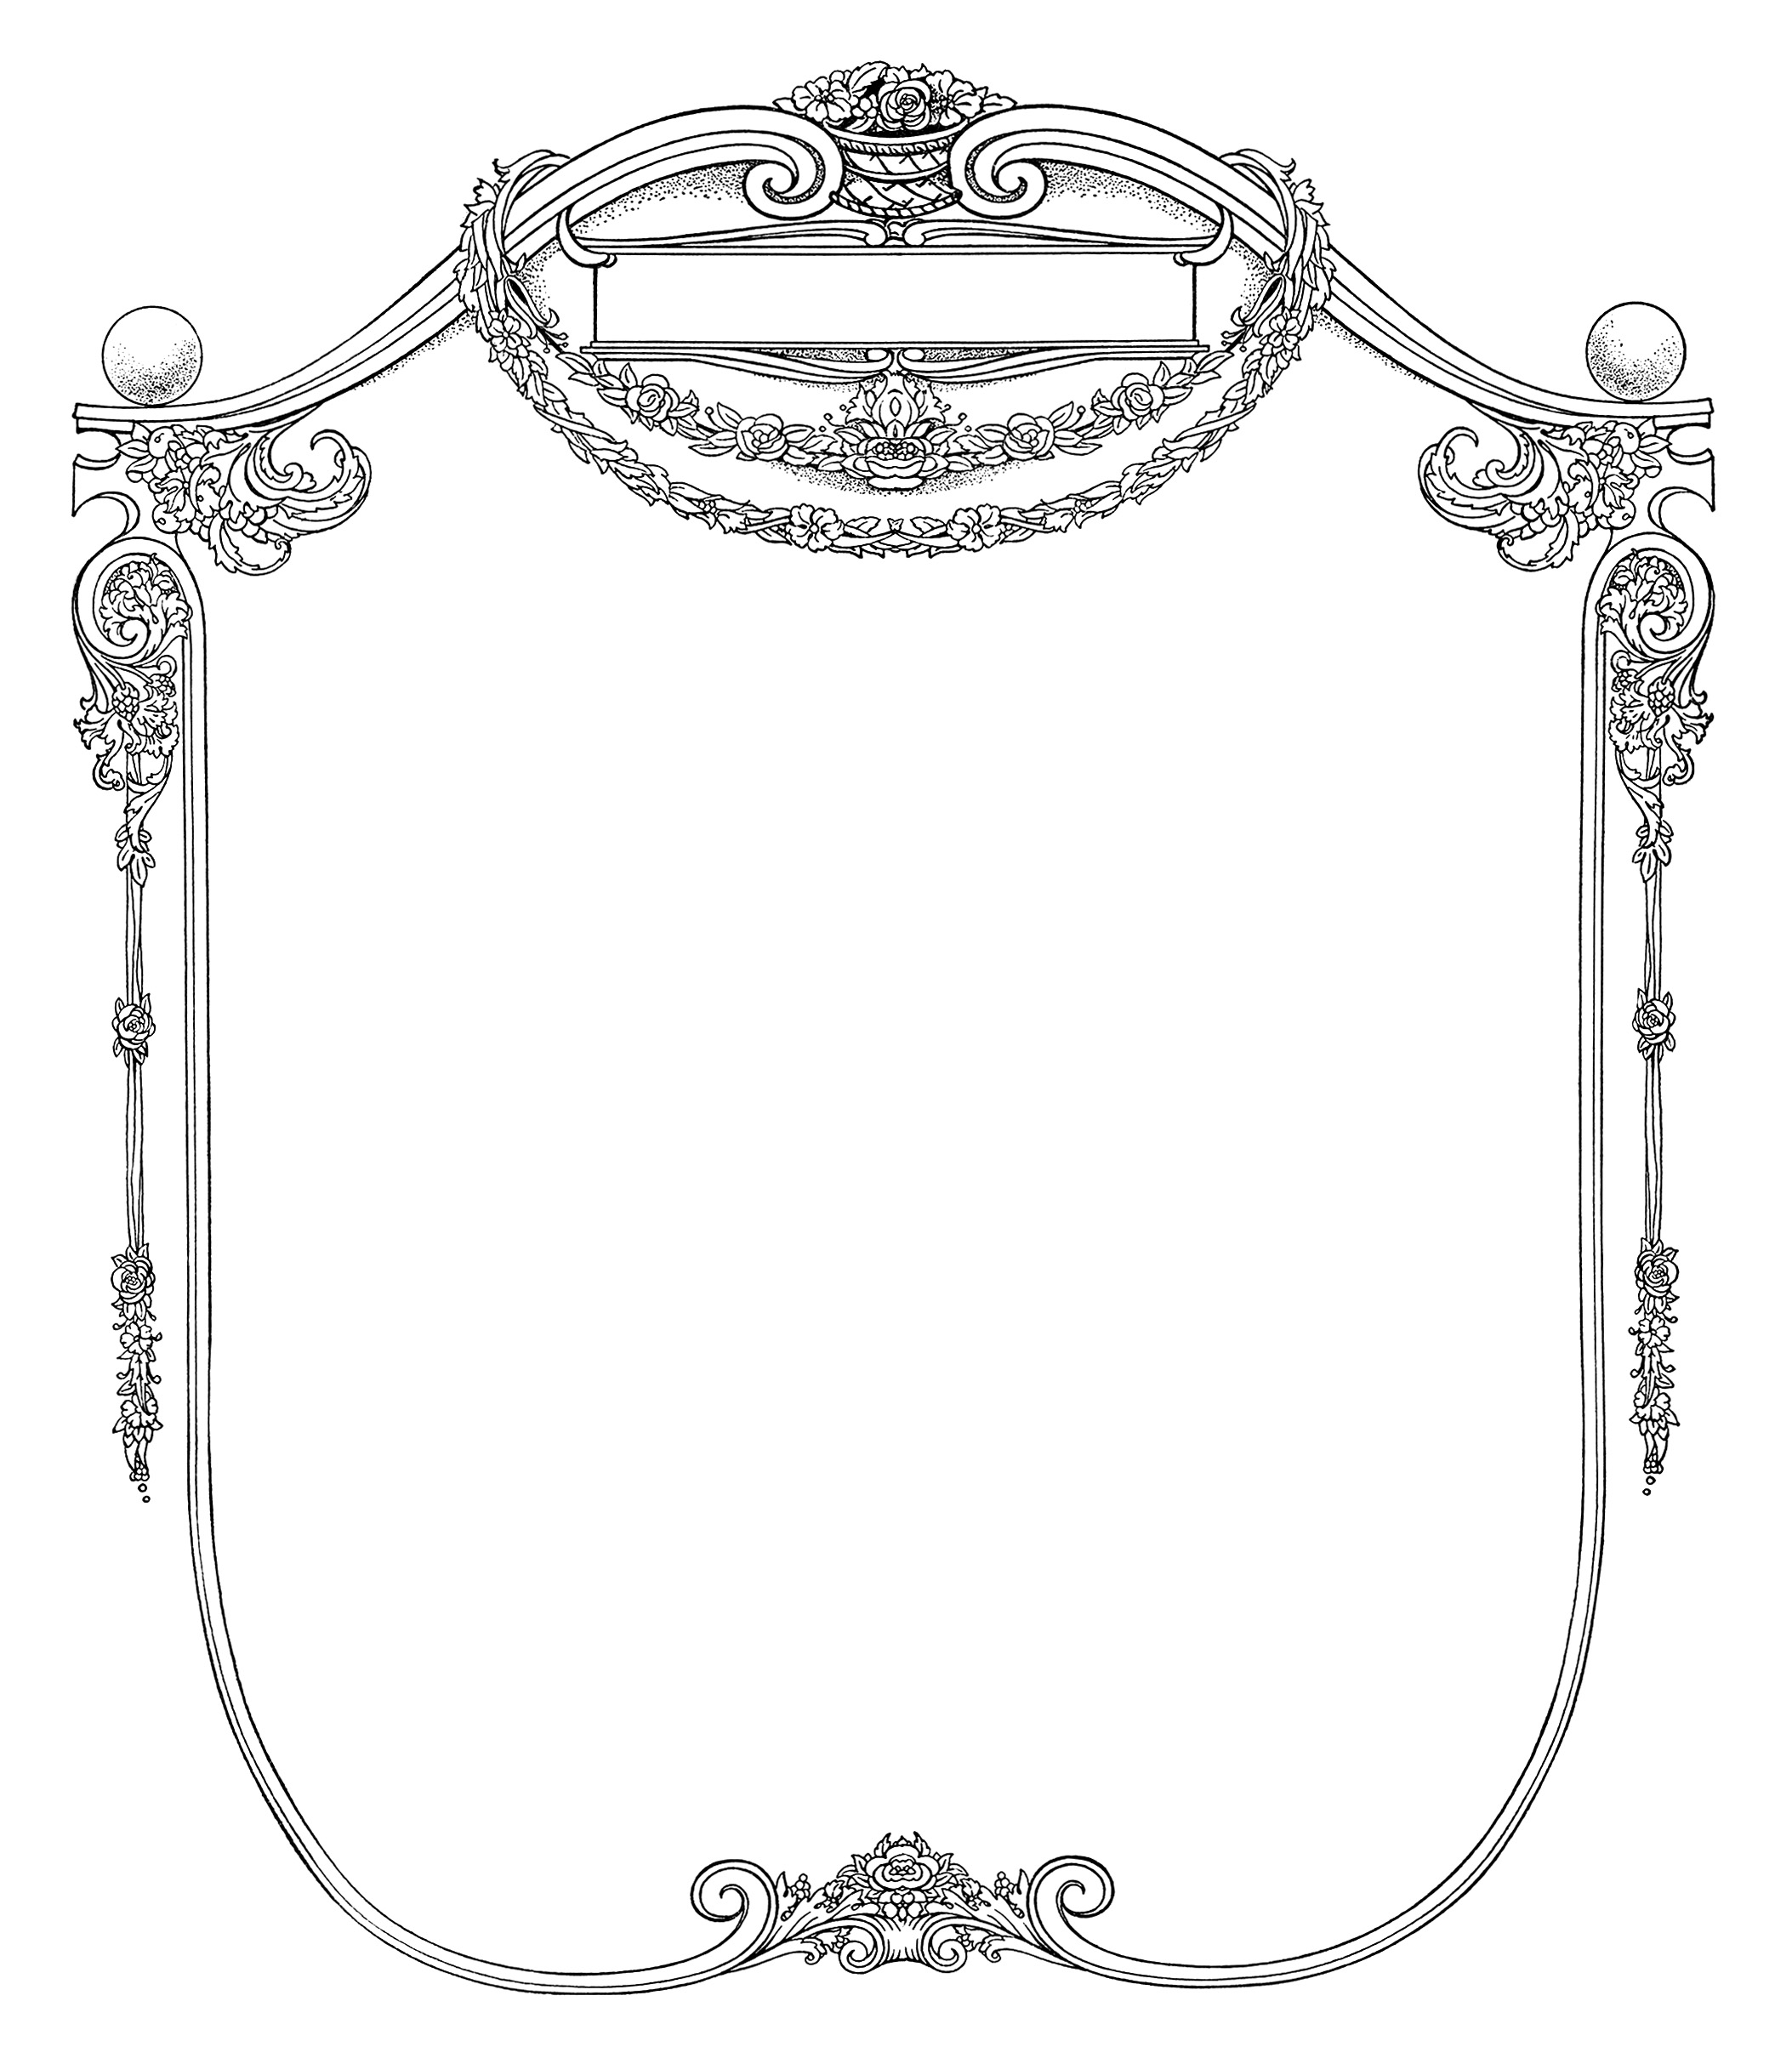 clipart frames free download - photo #17